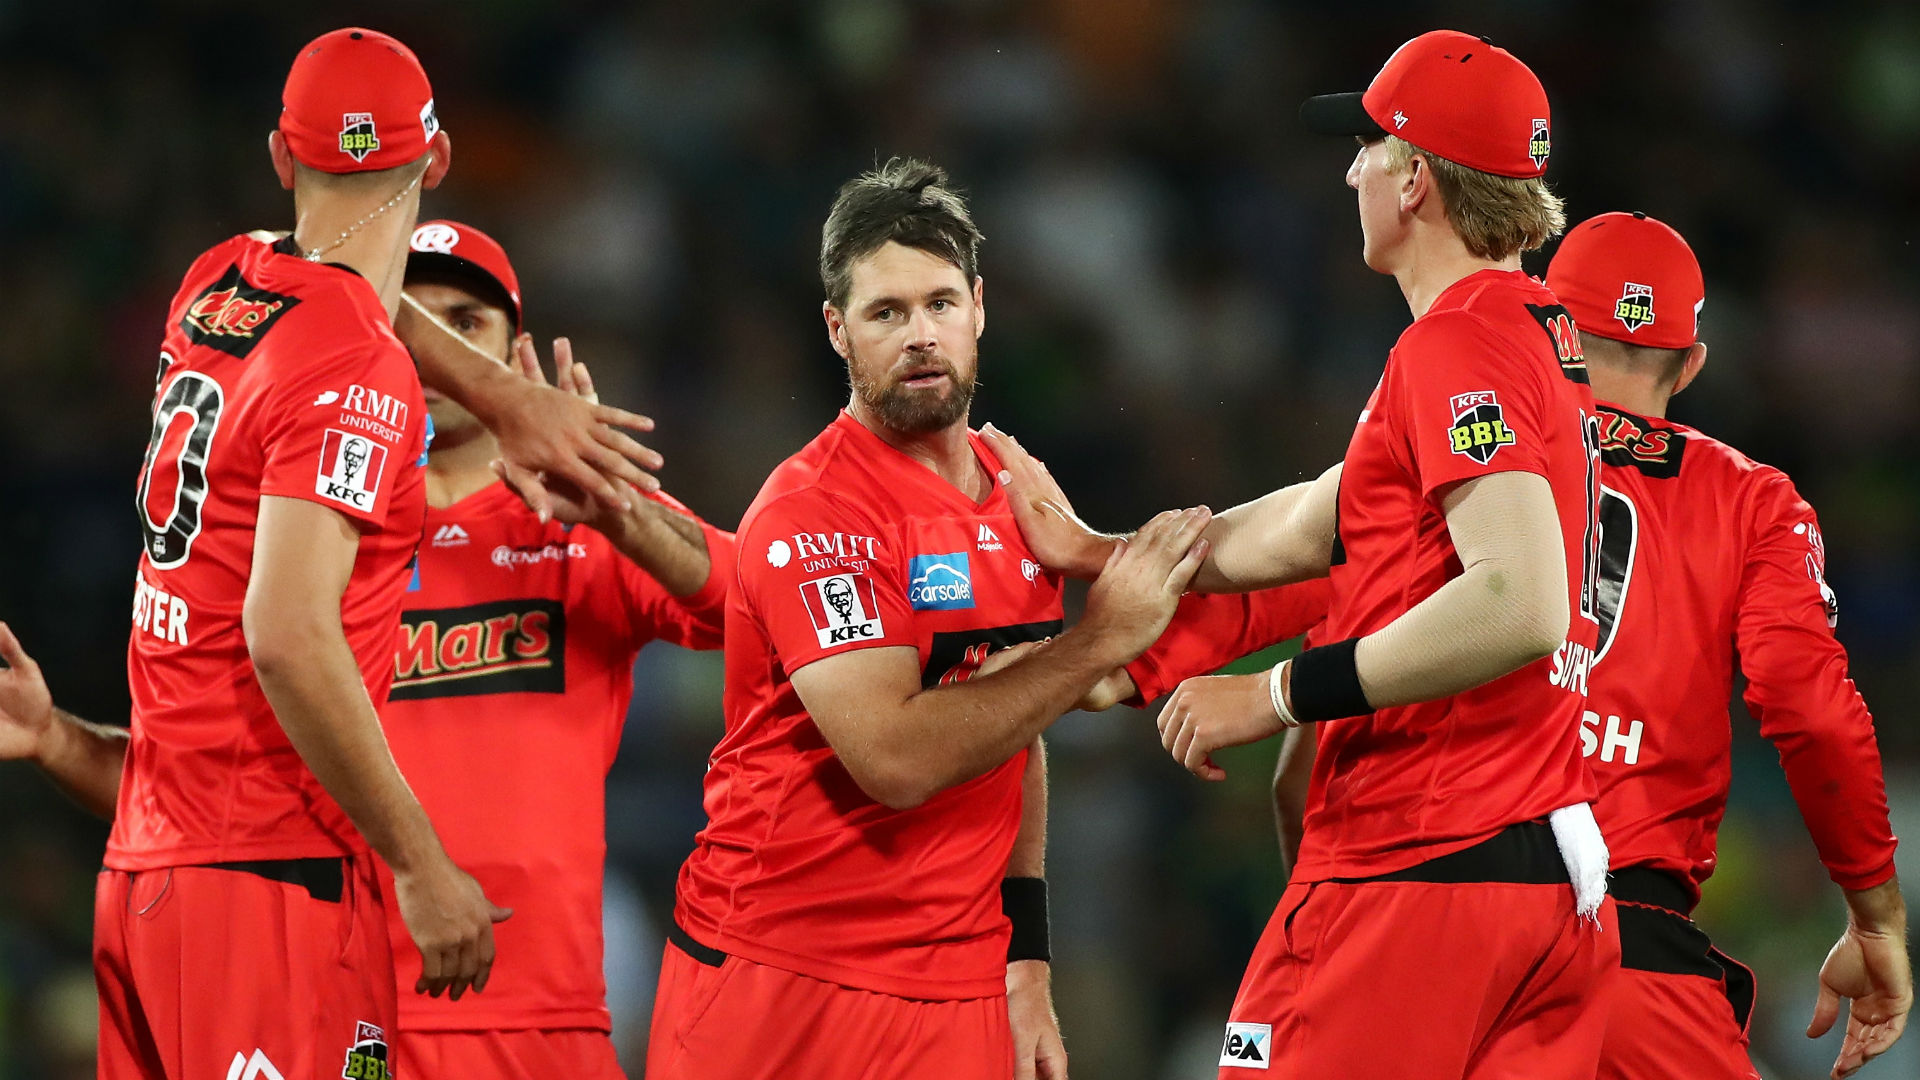 At long last, Melbourne Renegades have a Big Bash League victory to their name as Sydney Thunder suffered defeat in Canberra.